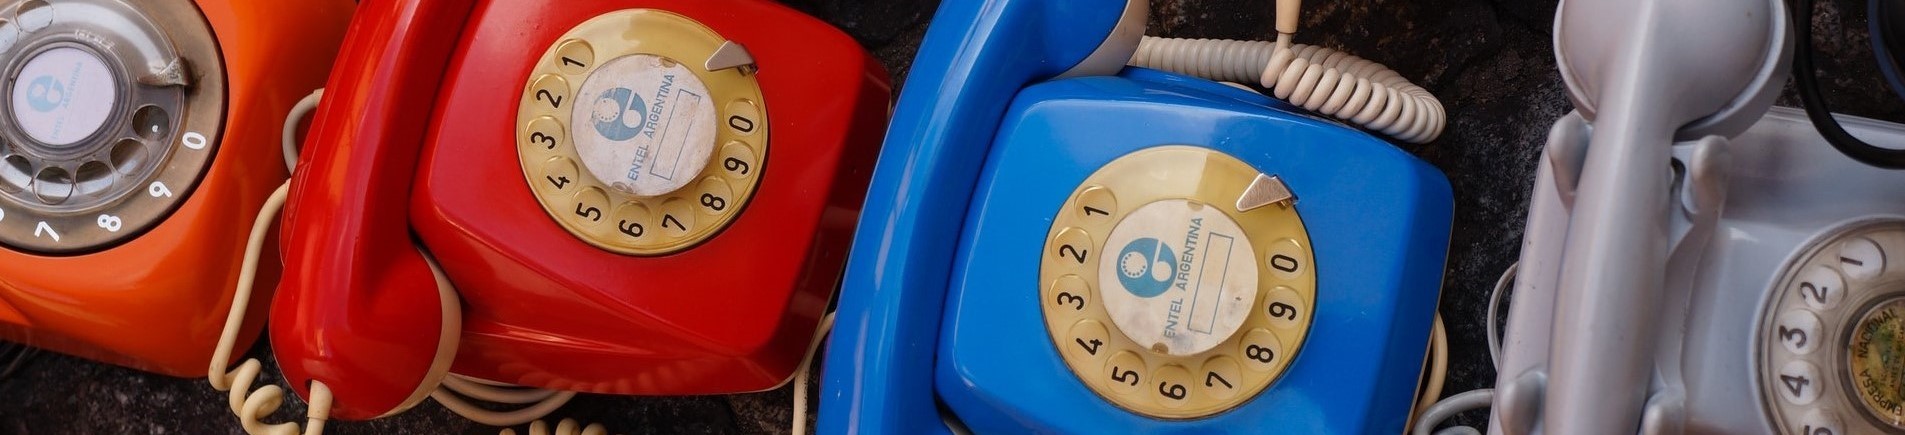 colorful rotary telephones